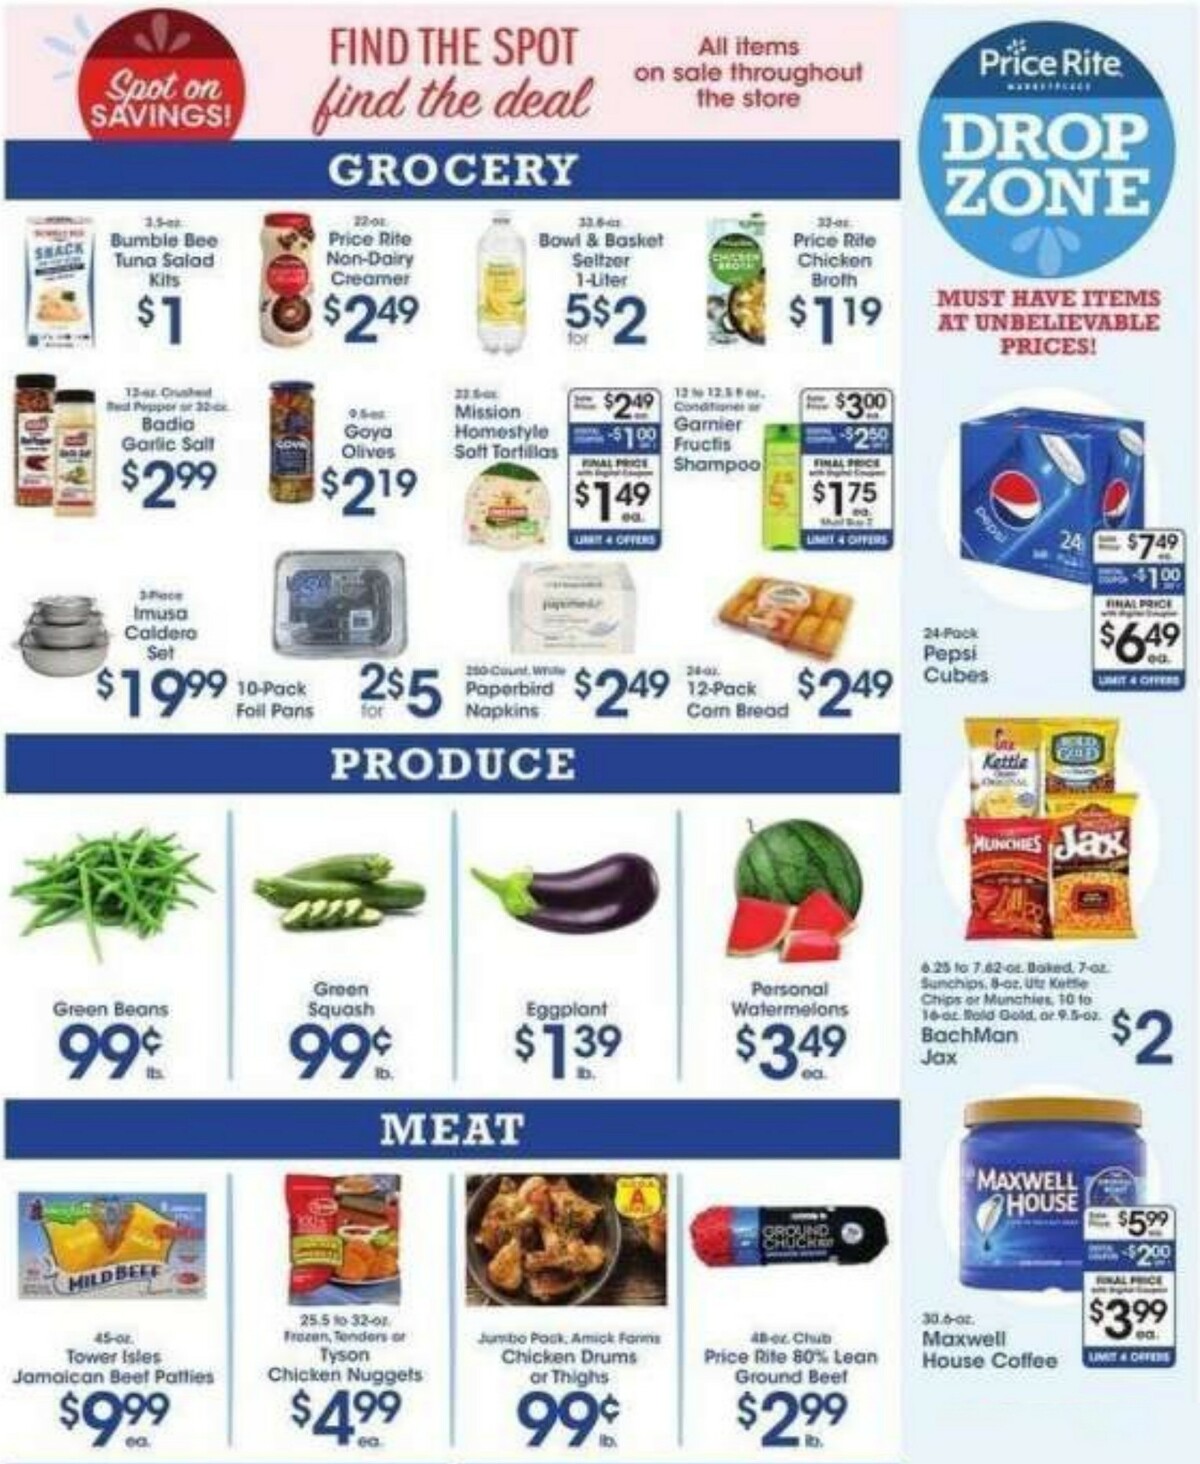 Price Rite Weekly Ad from March 26